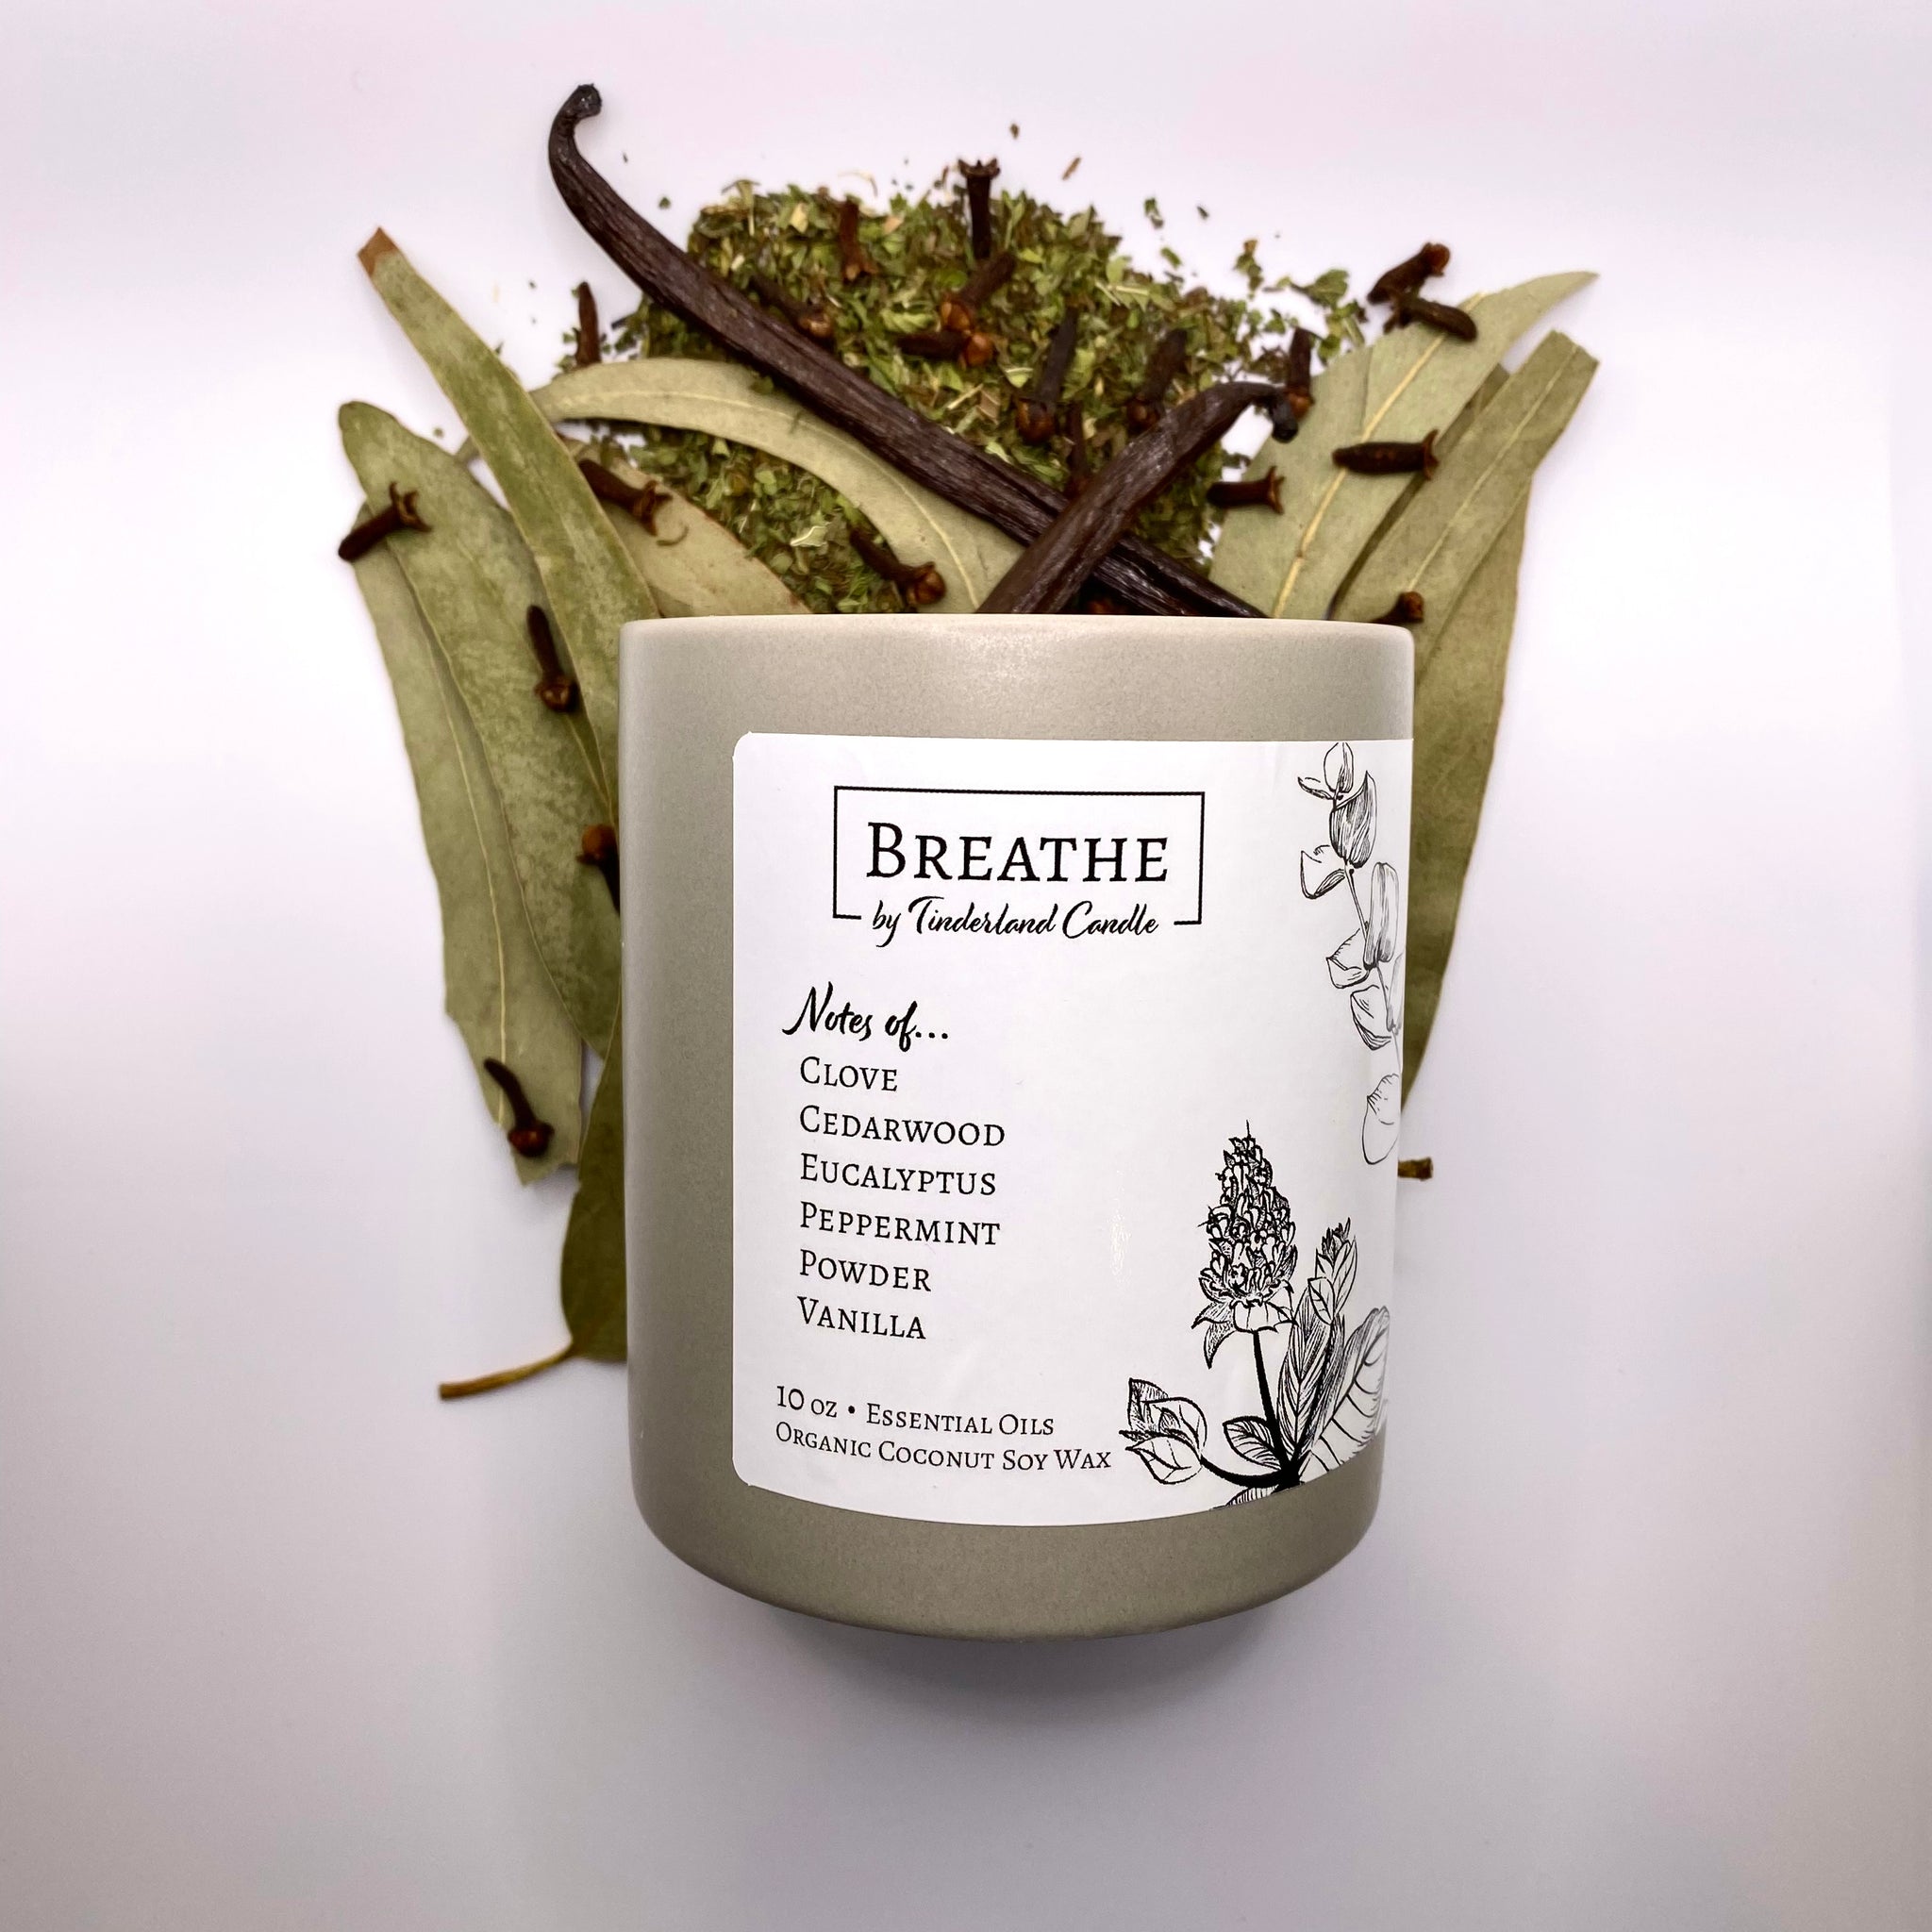 Breathe scented candle infused with organic eucalyptus and peppermint essential oils